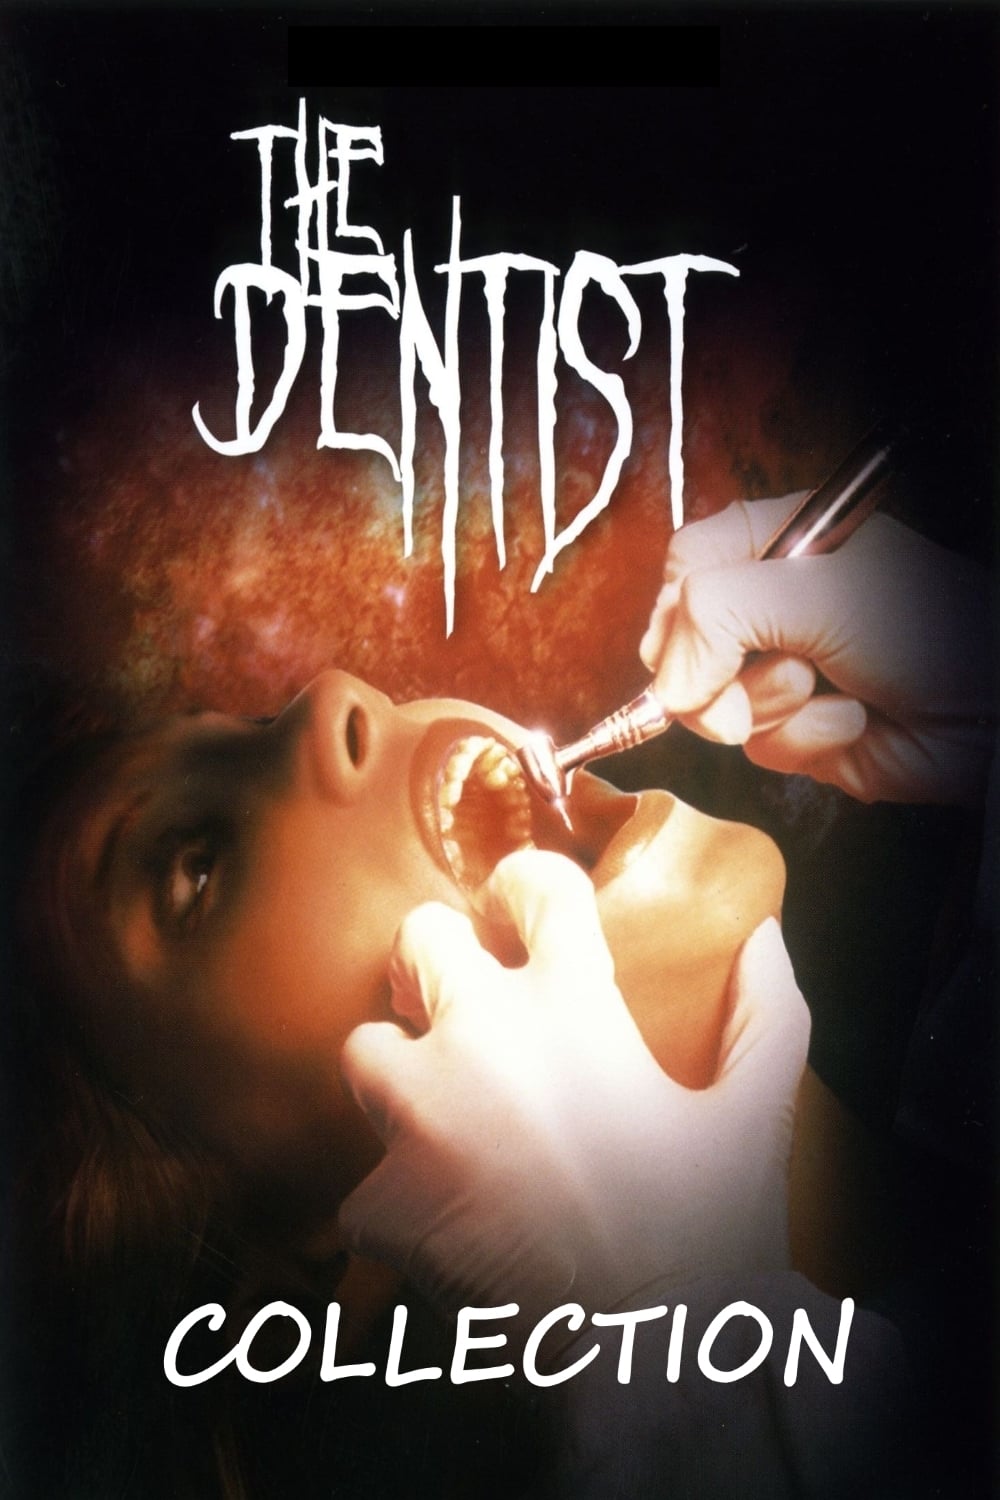 chris buckles recommends The Dentist Full Movie